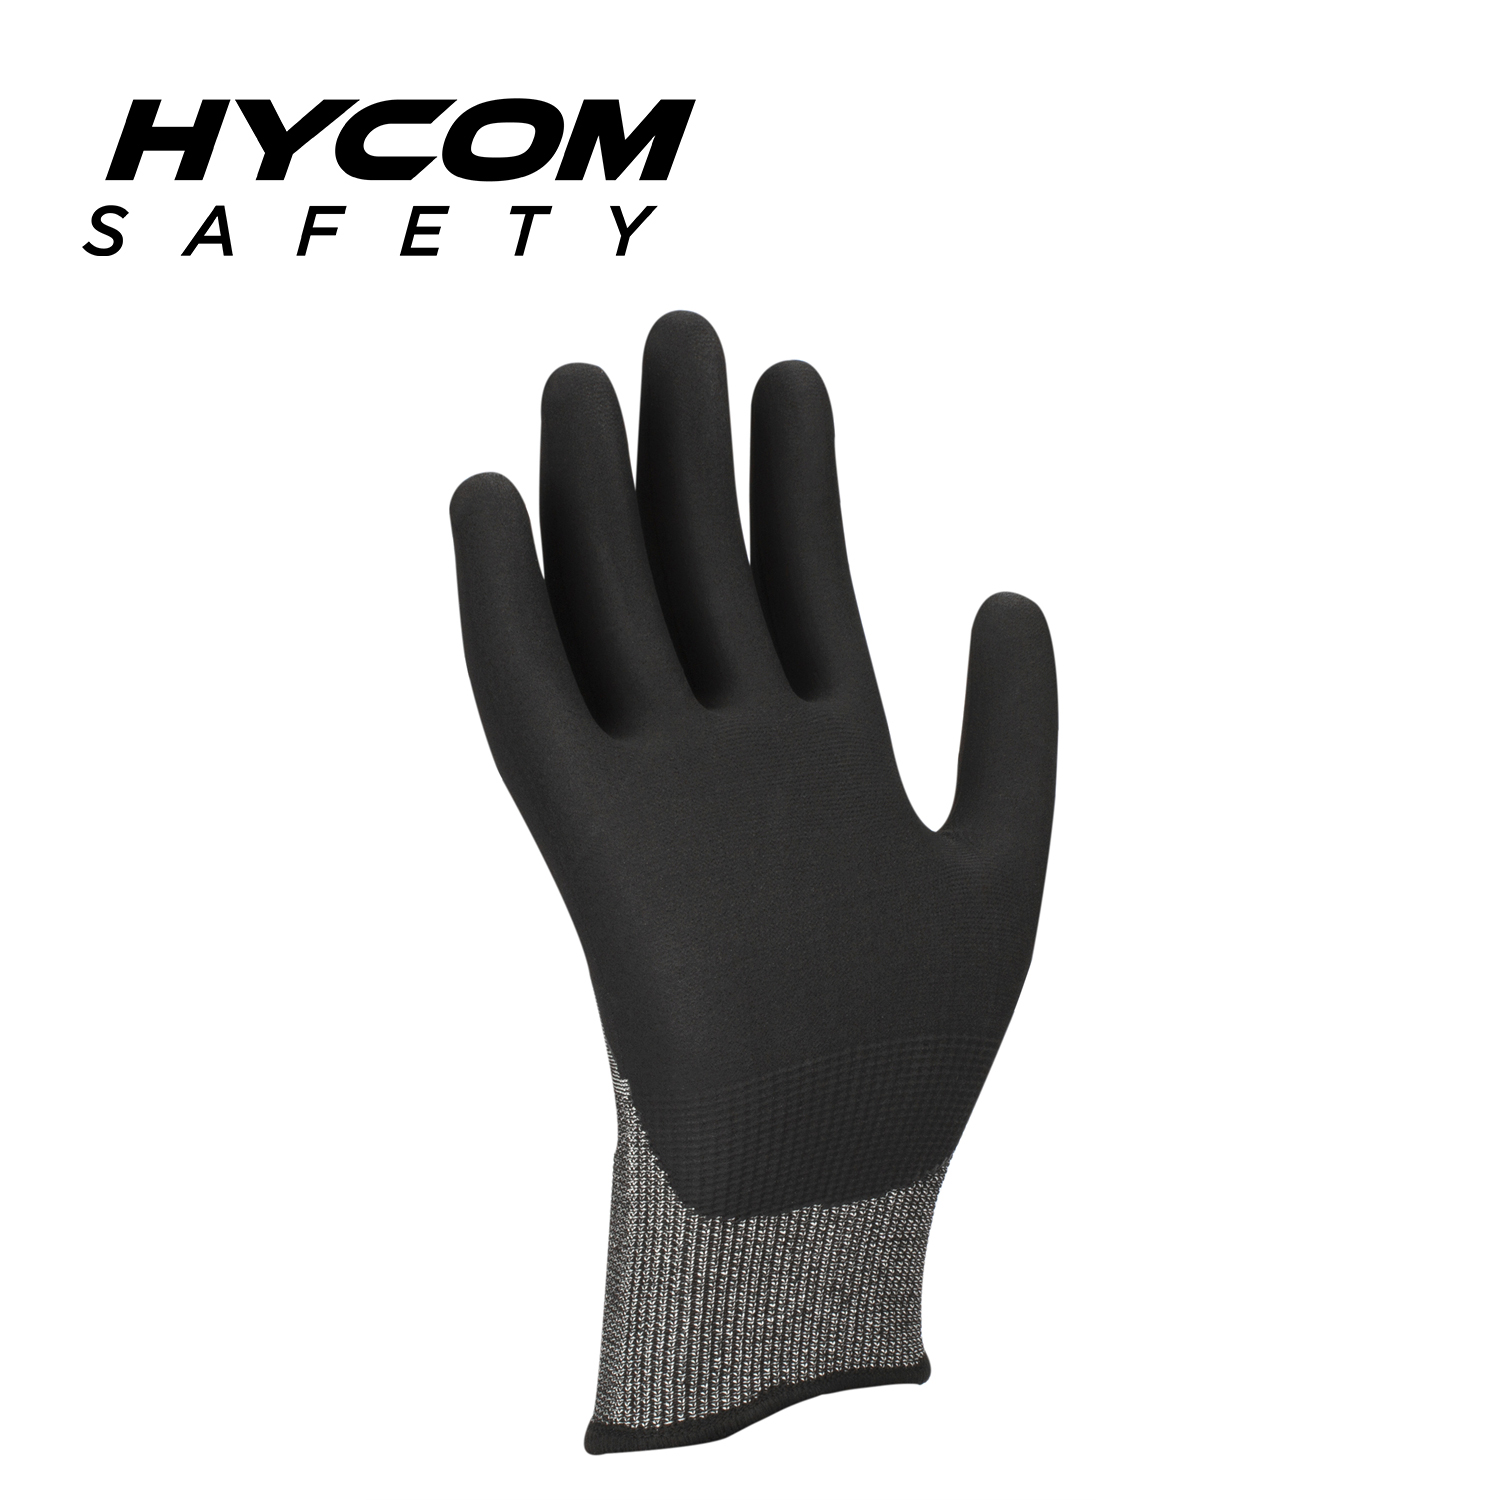 HYCOM 18G ANSI 6 Cut Resistant Glove with Palm Foam Nitrile Coating PPE Gloves